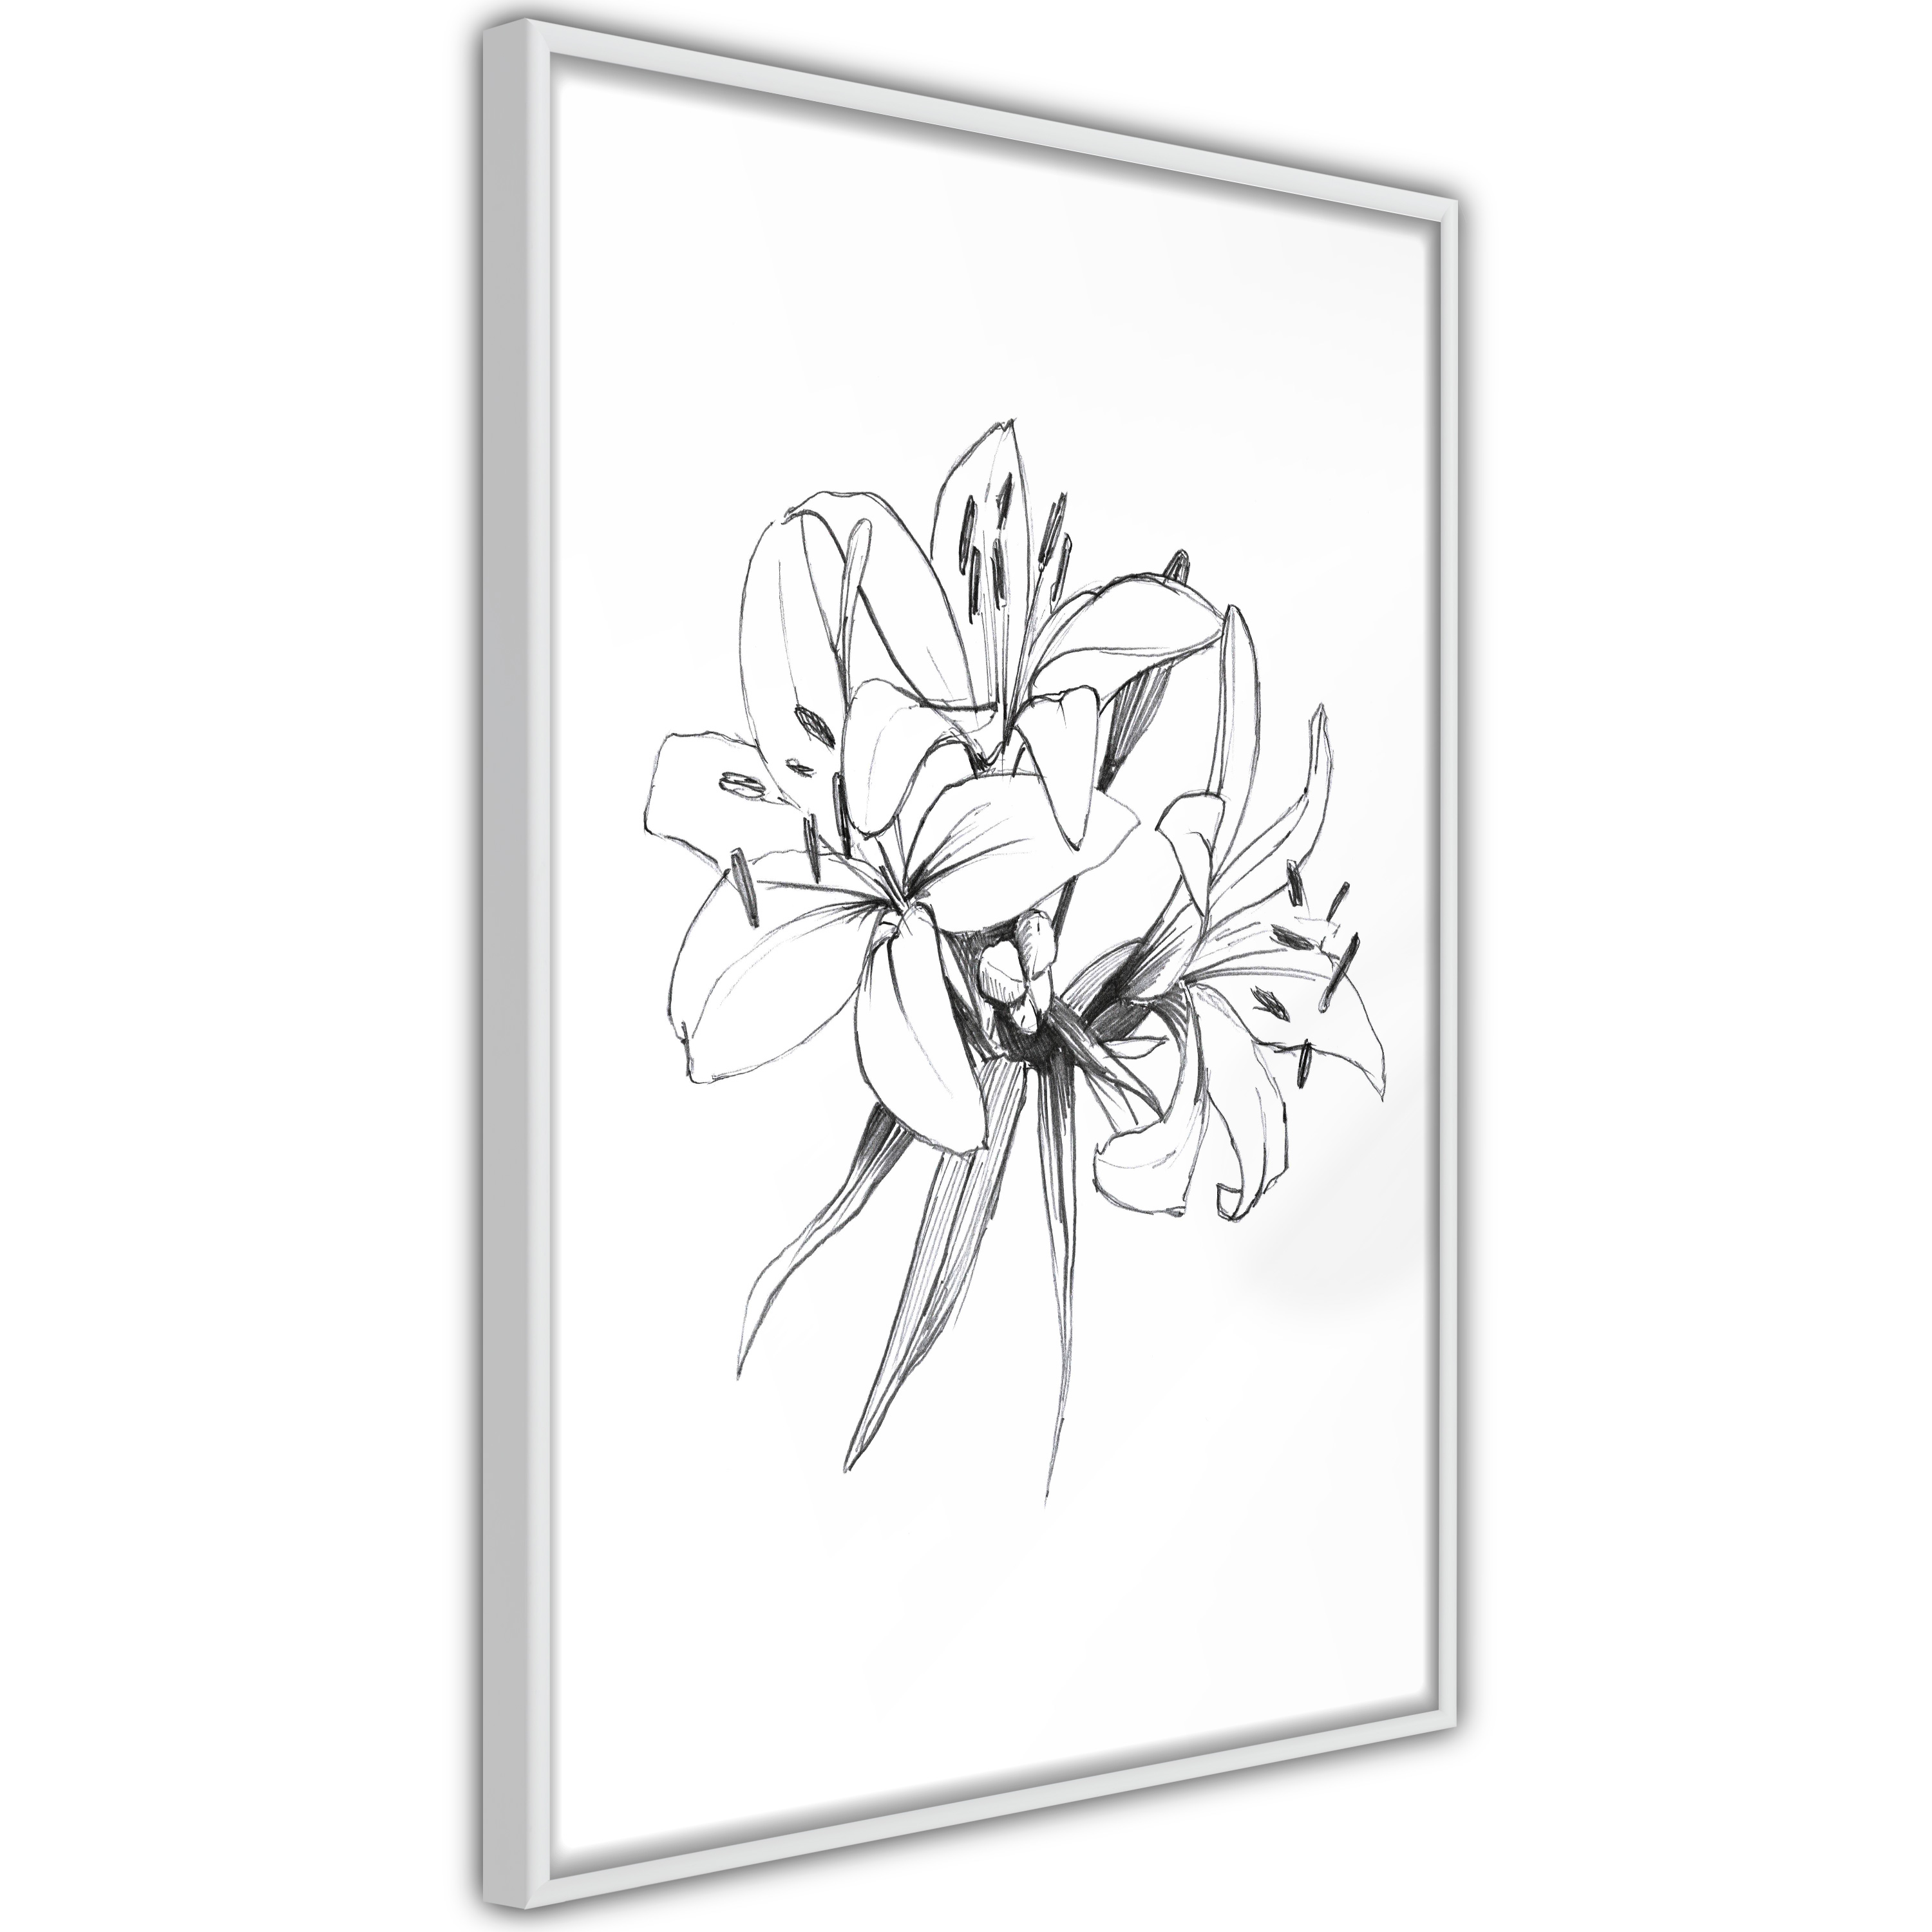 Poster - Sketch of Lillies - 20x30